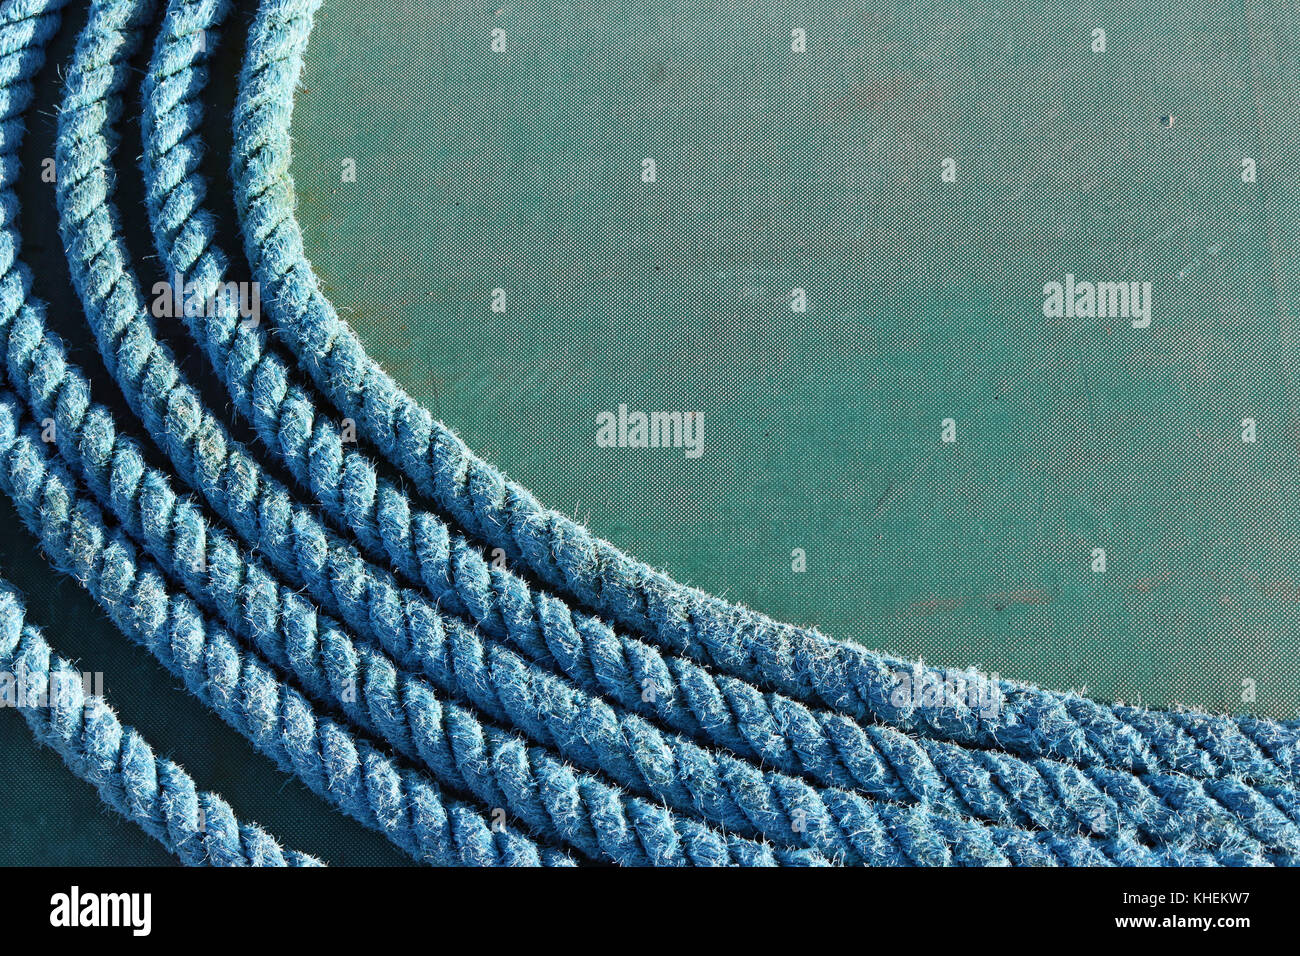 Coiled blue synthetic rope with a background of green tarpaulin on a sailing ship. Good copy space. Stock Photo